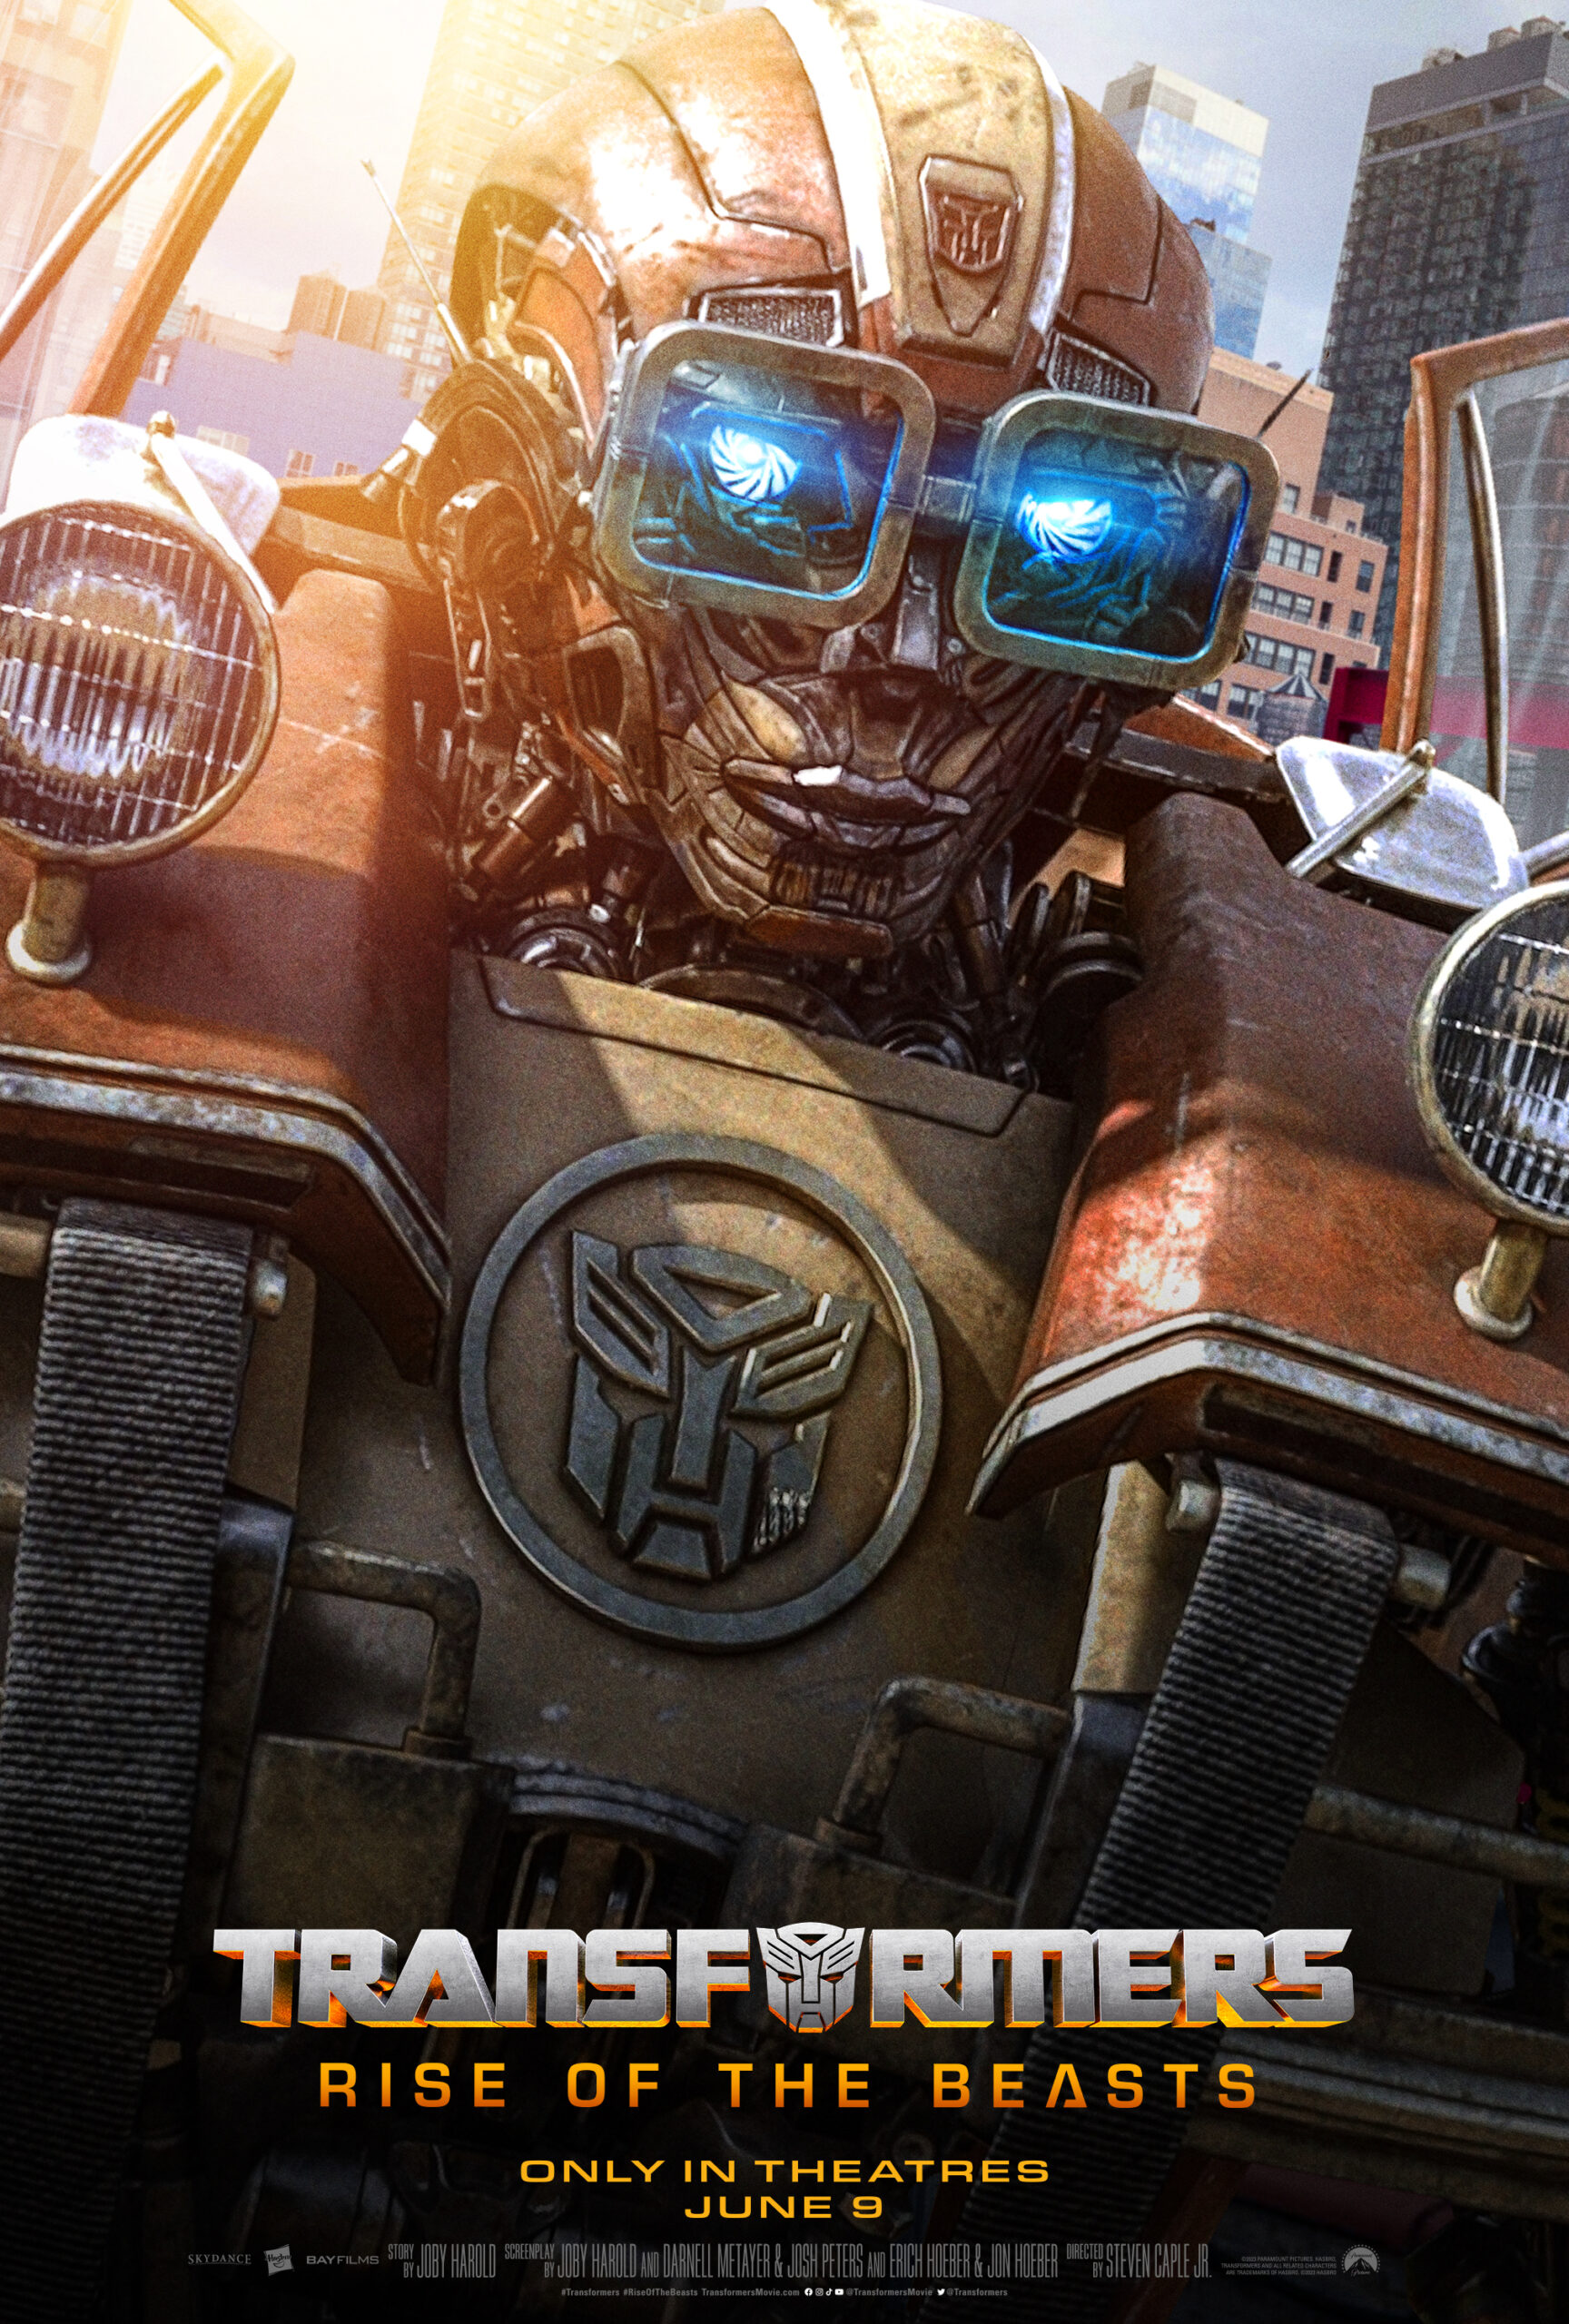 Transformers: Rise Of The Beasts poster (Paramount Pictures)